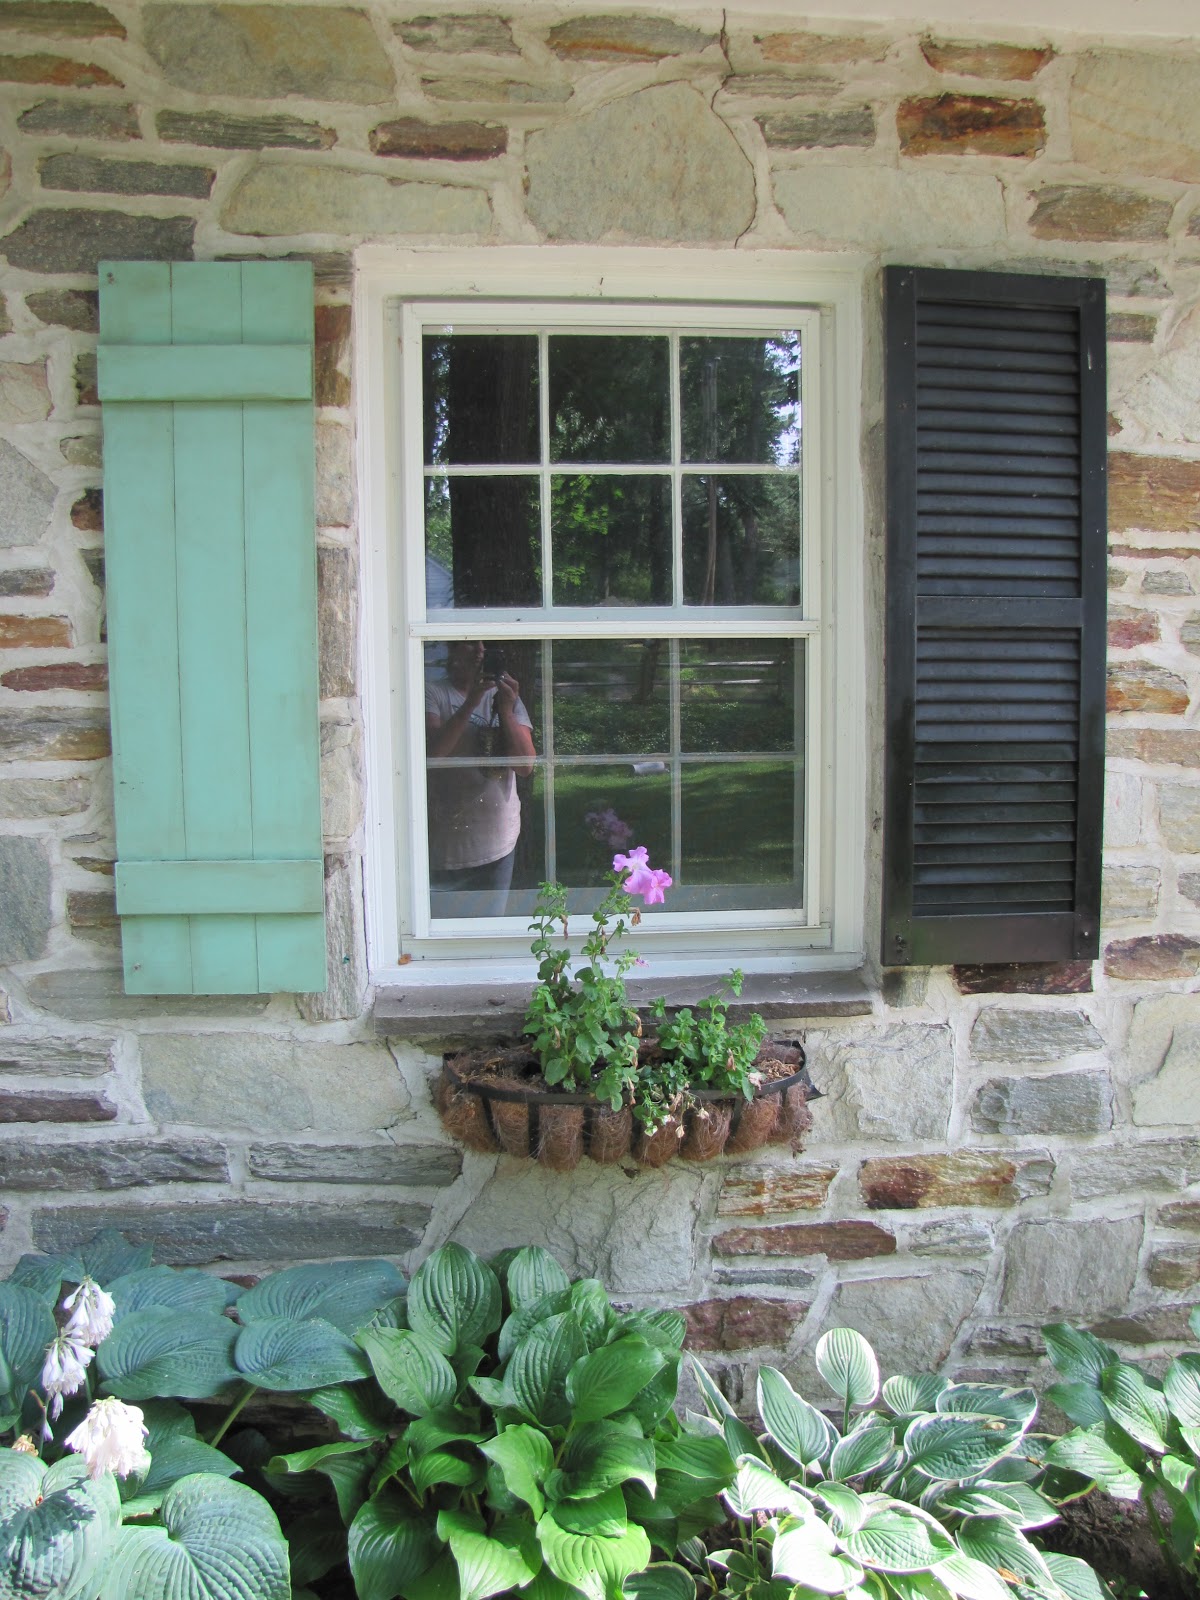 {How to make shutters The Video} The Painted Home by Denise Sabia